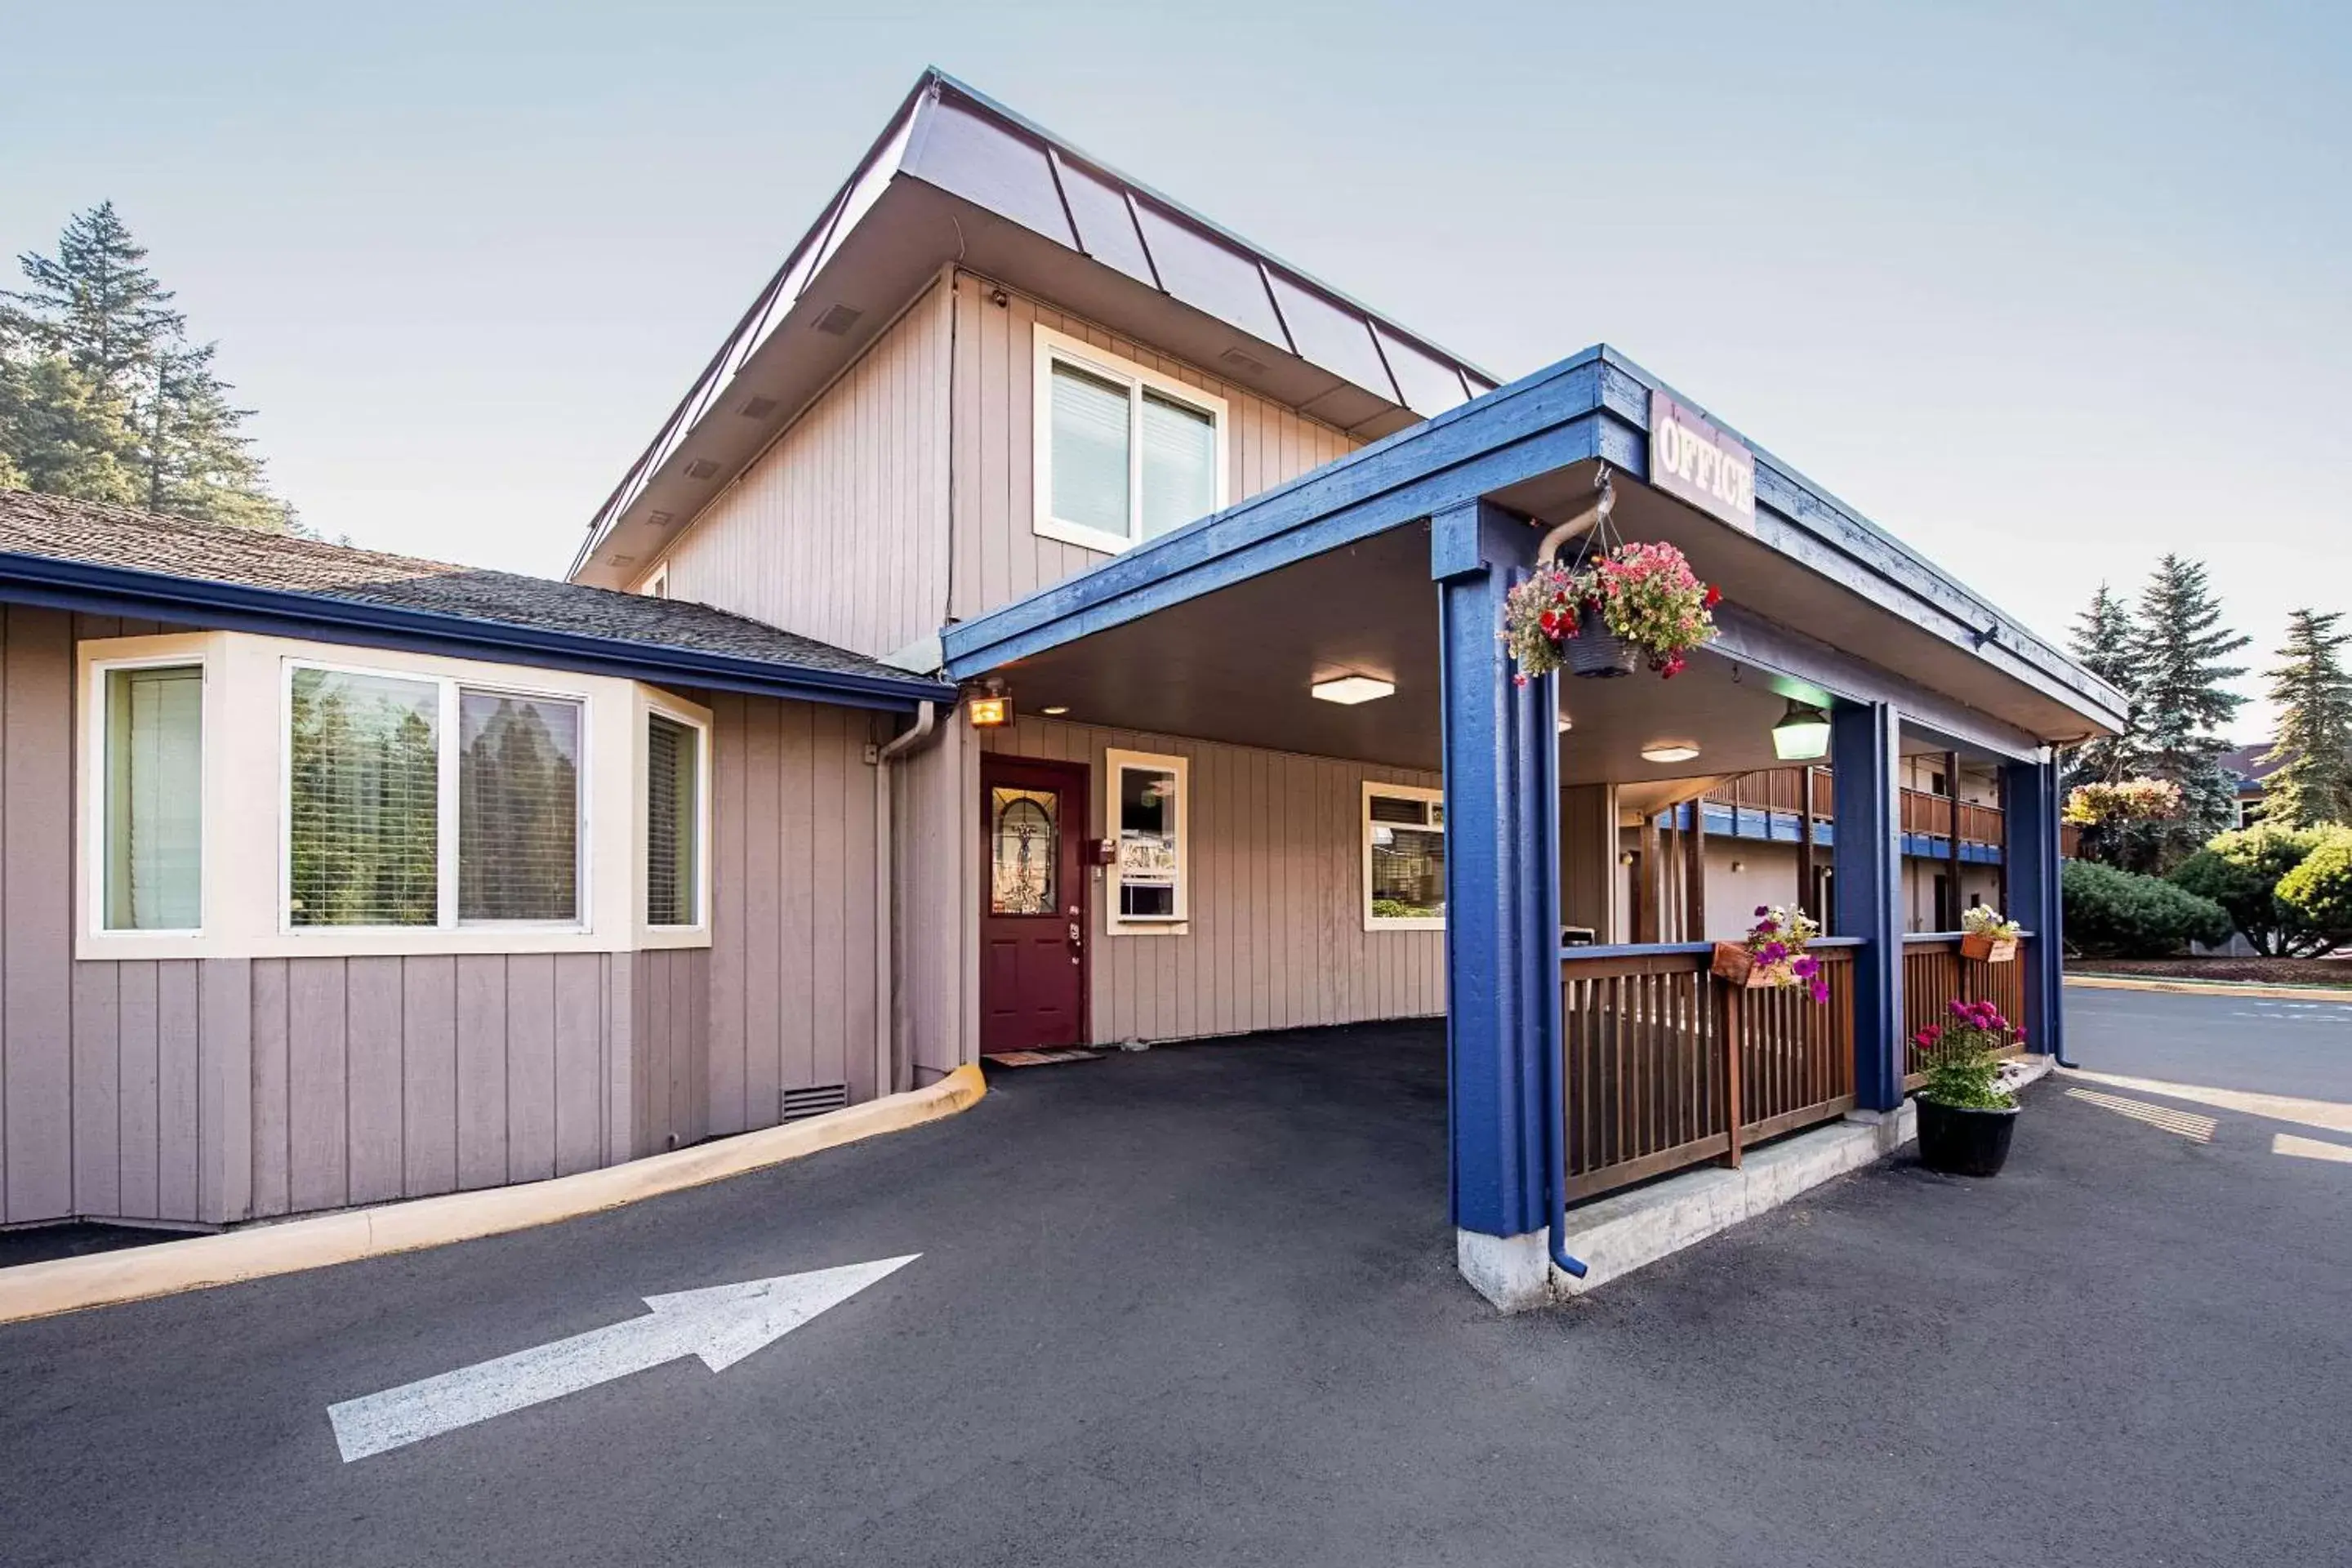 Property building in Rodeway Inn Enumclaw Mount Rainer-Crystal Mountain Area